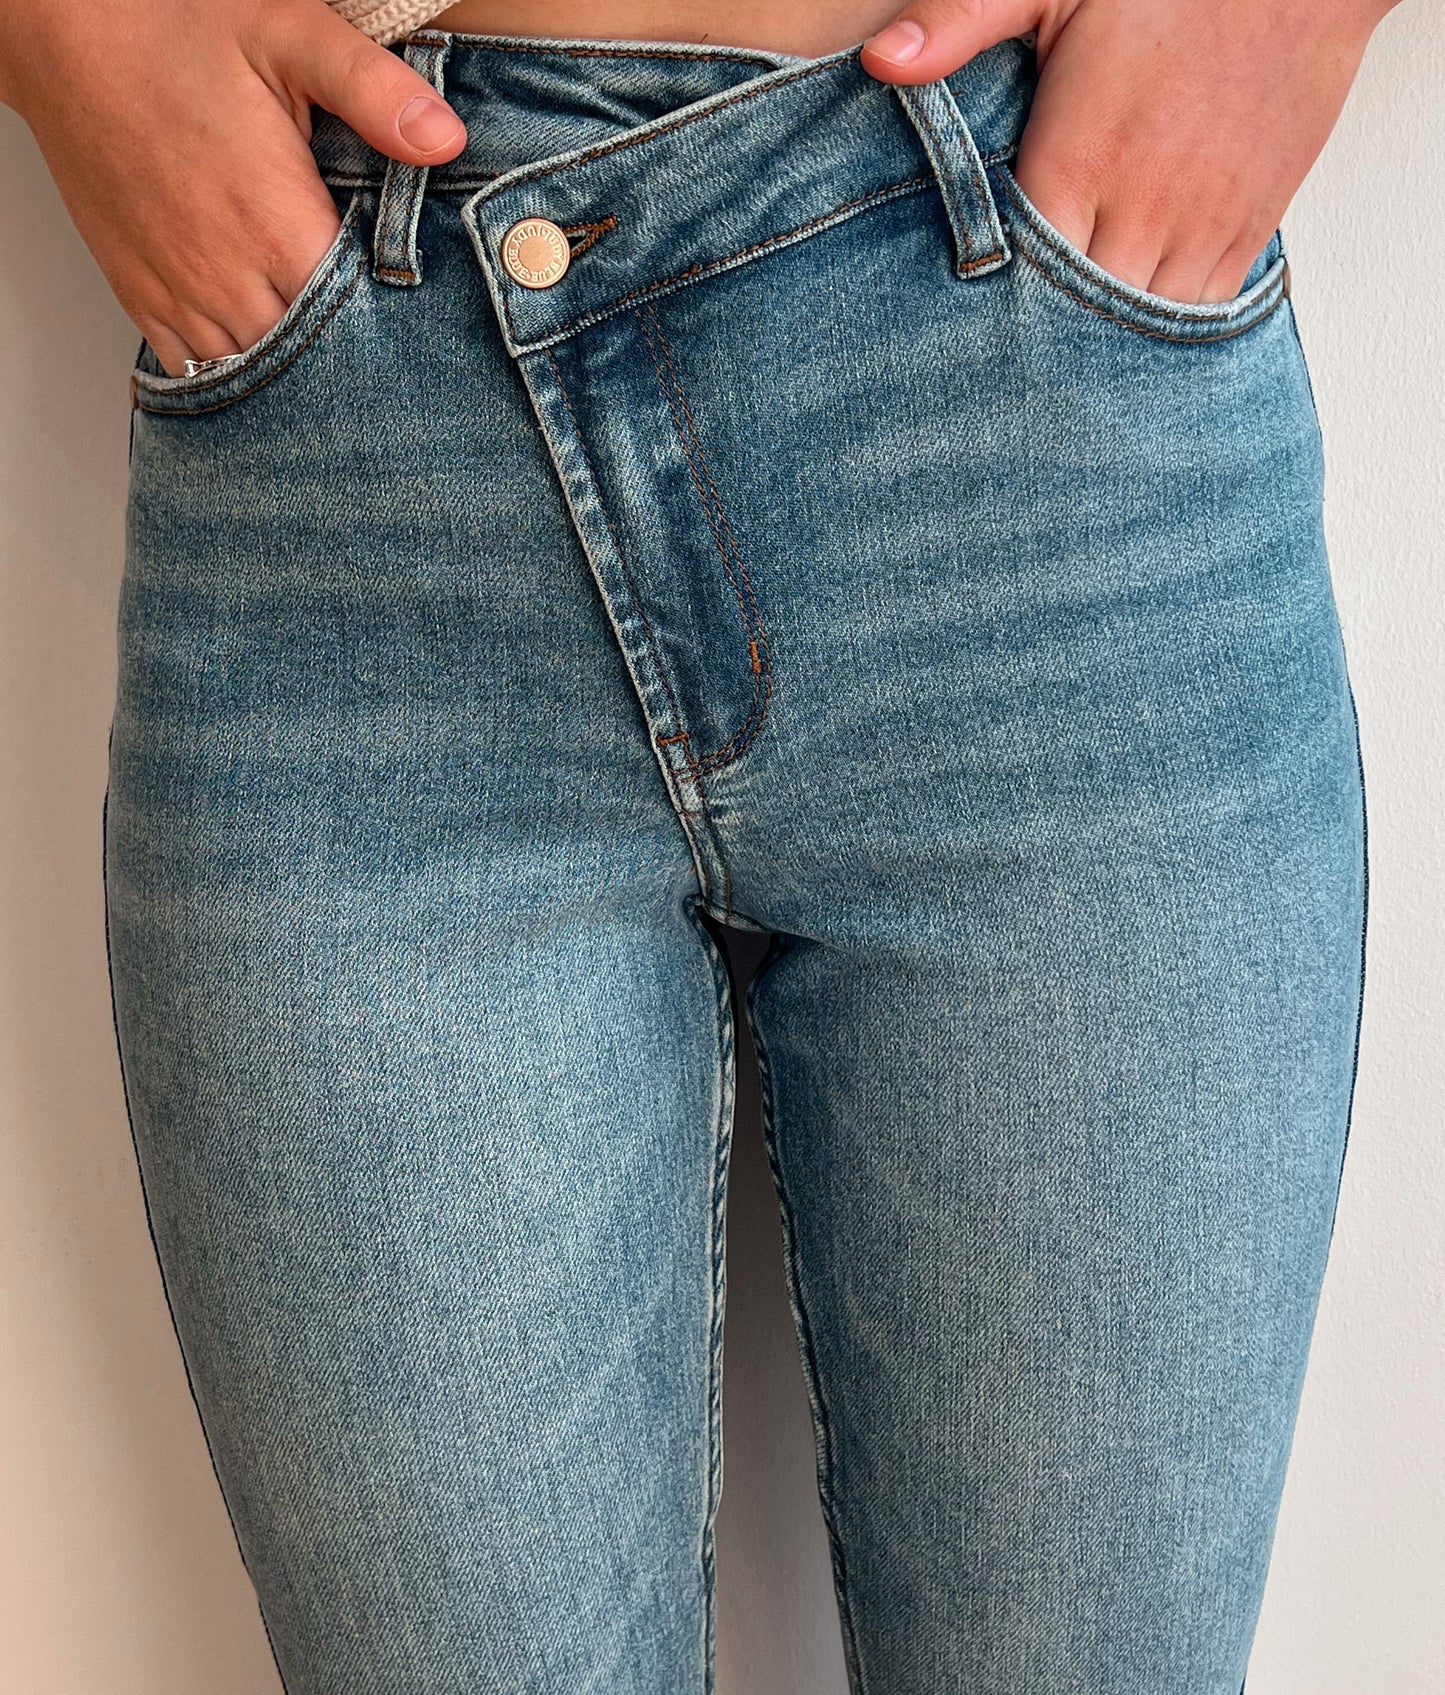 The Judy Blue Crossover Jeans